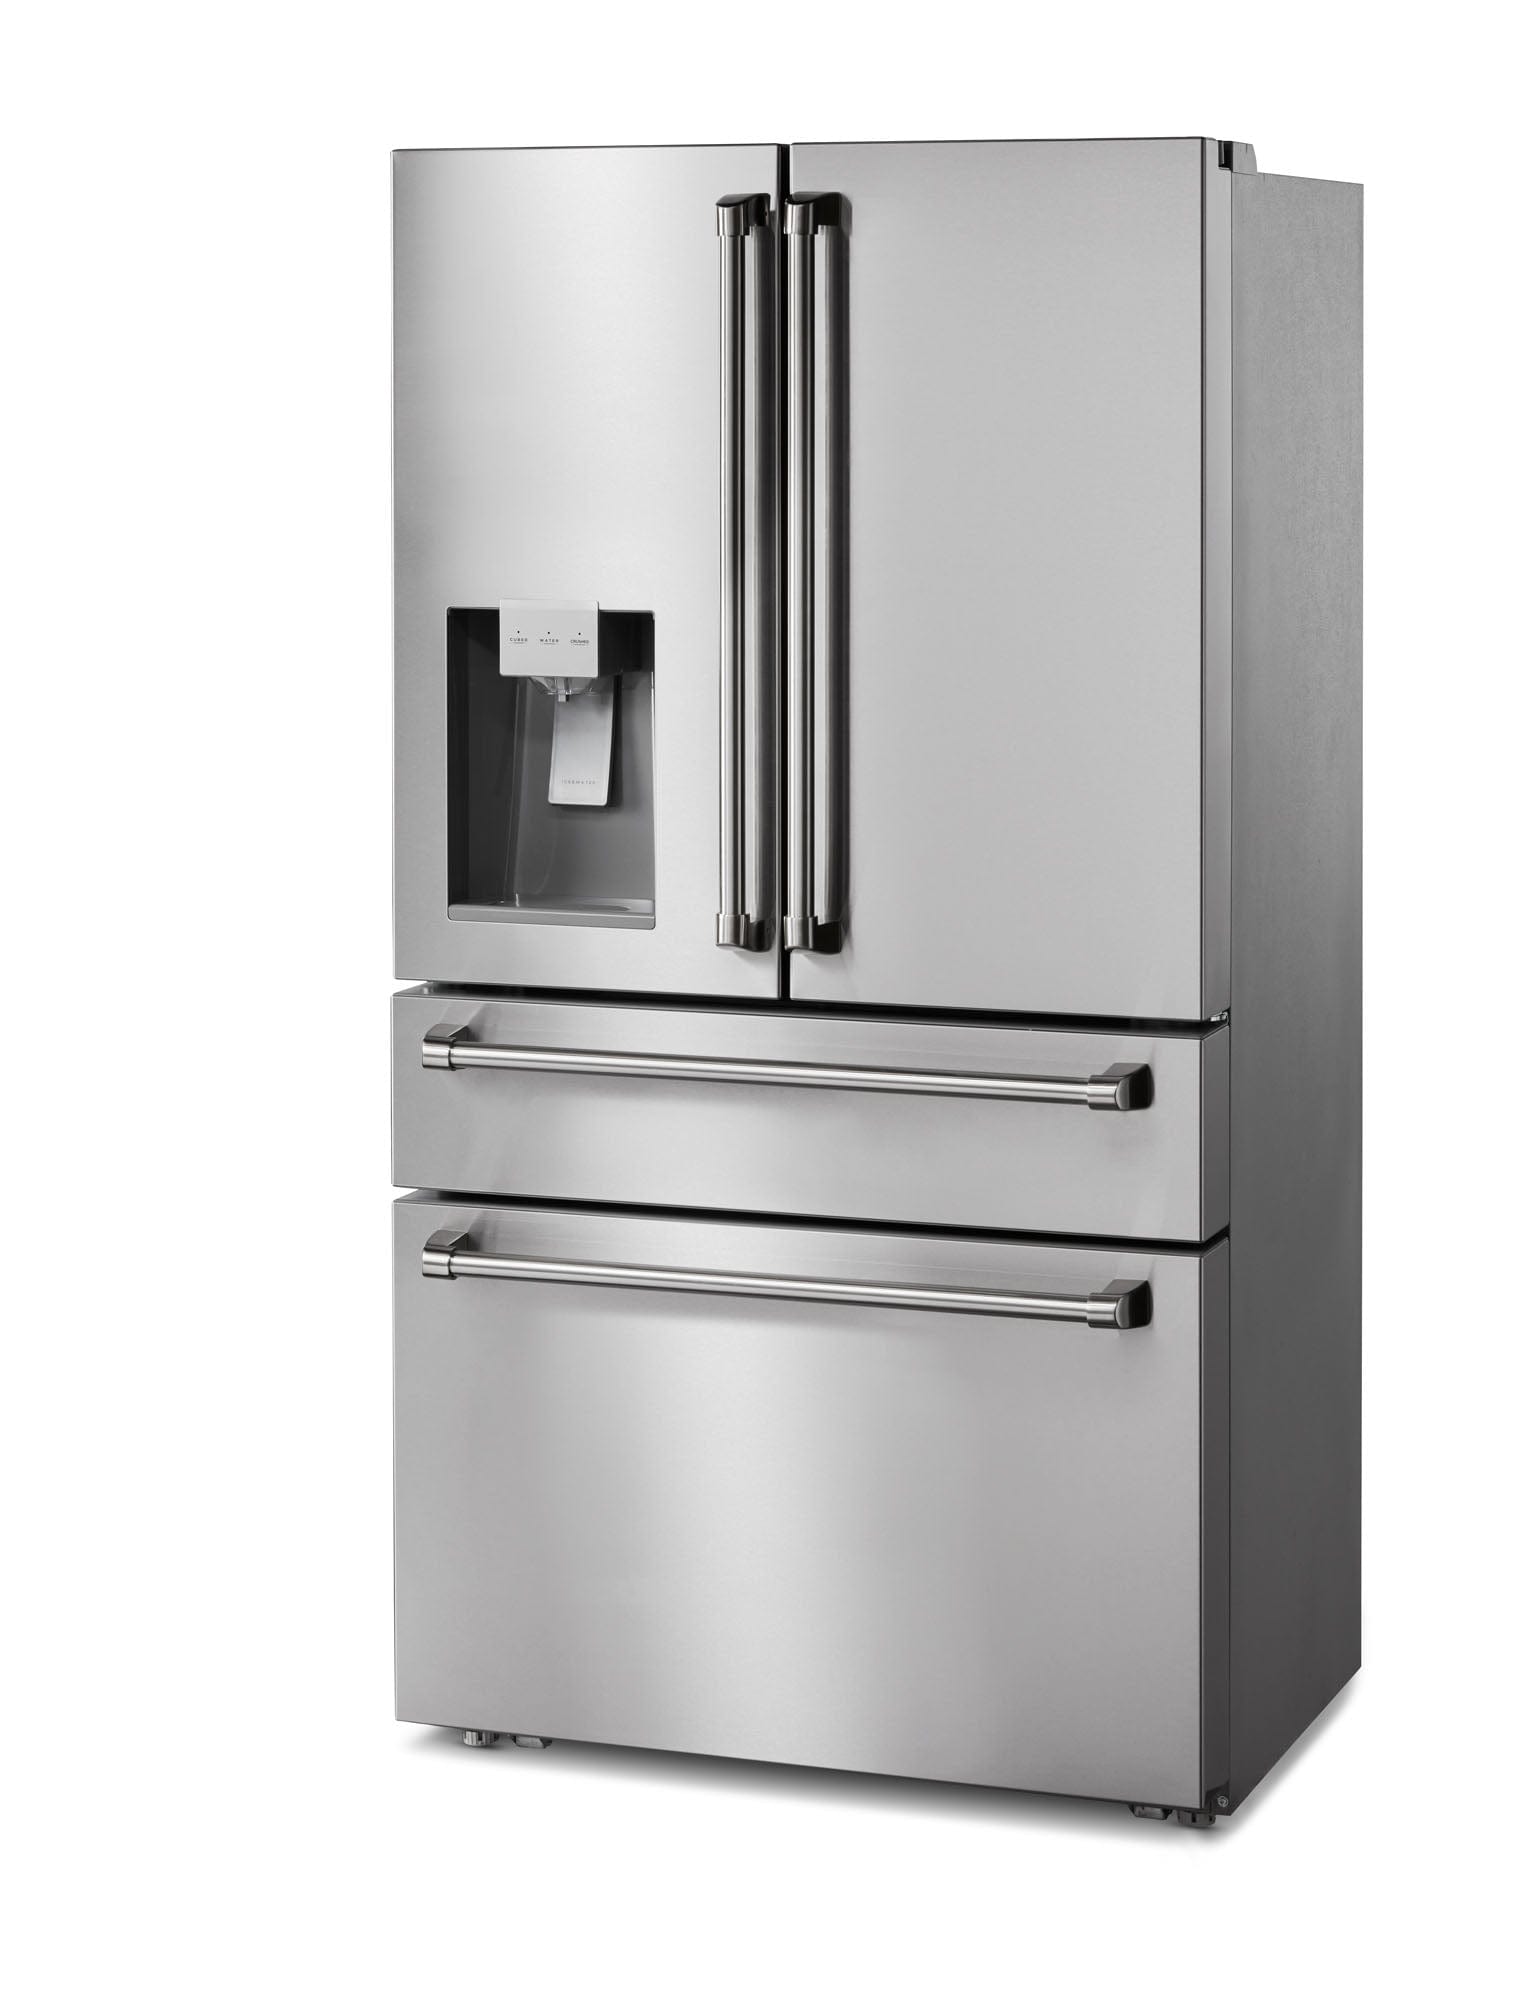 Thor Kitchen 36 Inch. Counter Depth Refrigerator in Stainless Steel with Water Dispenser Ice Maker, TRF3601FD Refrigerators TRF3601FD Luxury Appliances Direct